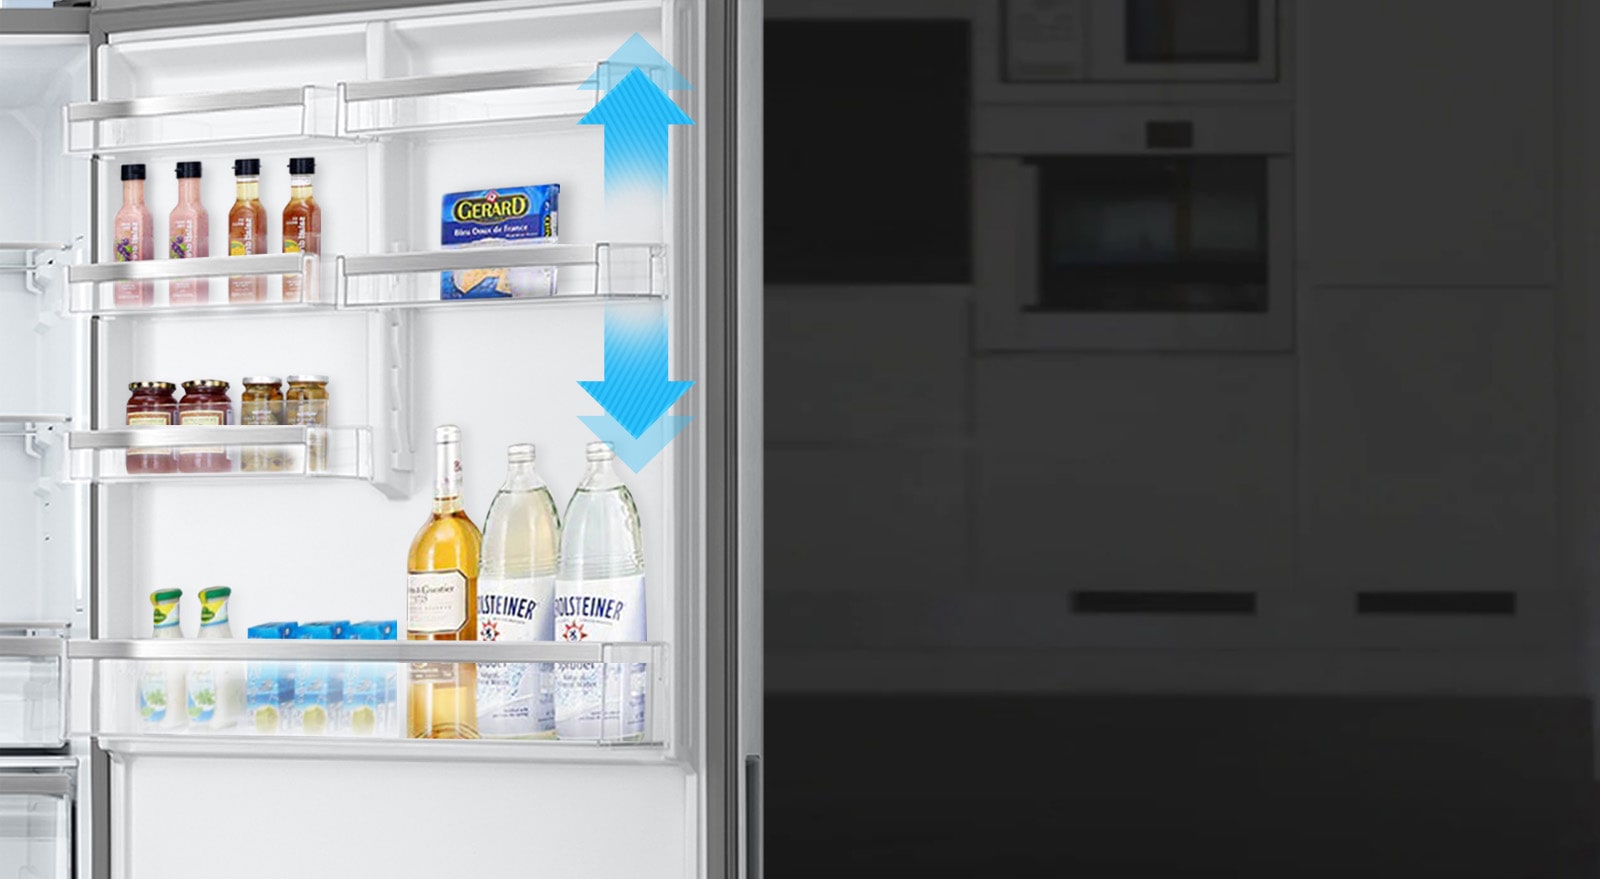 Various products stored in the refrigerator door